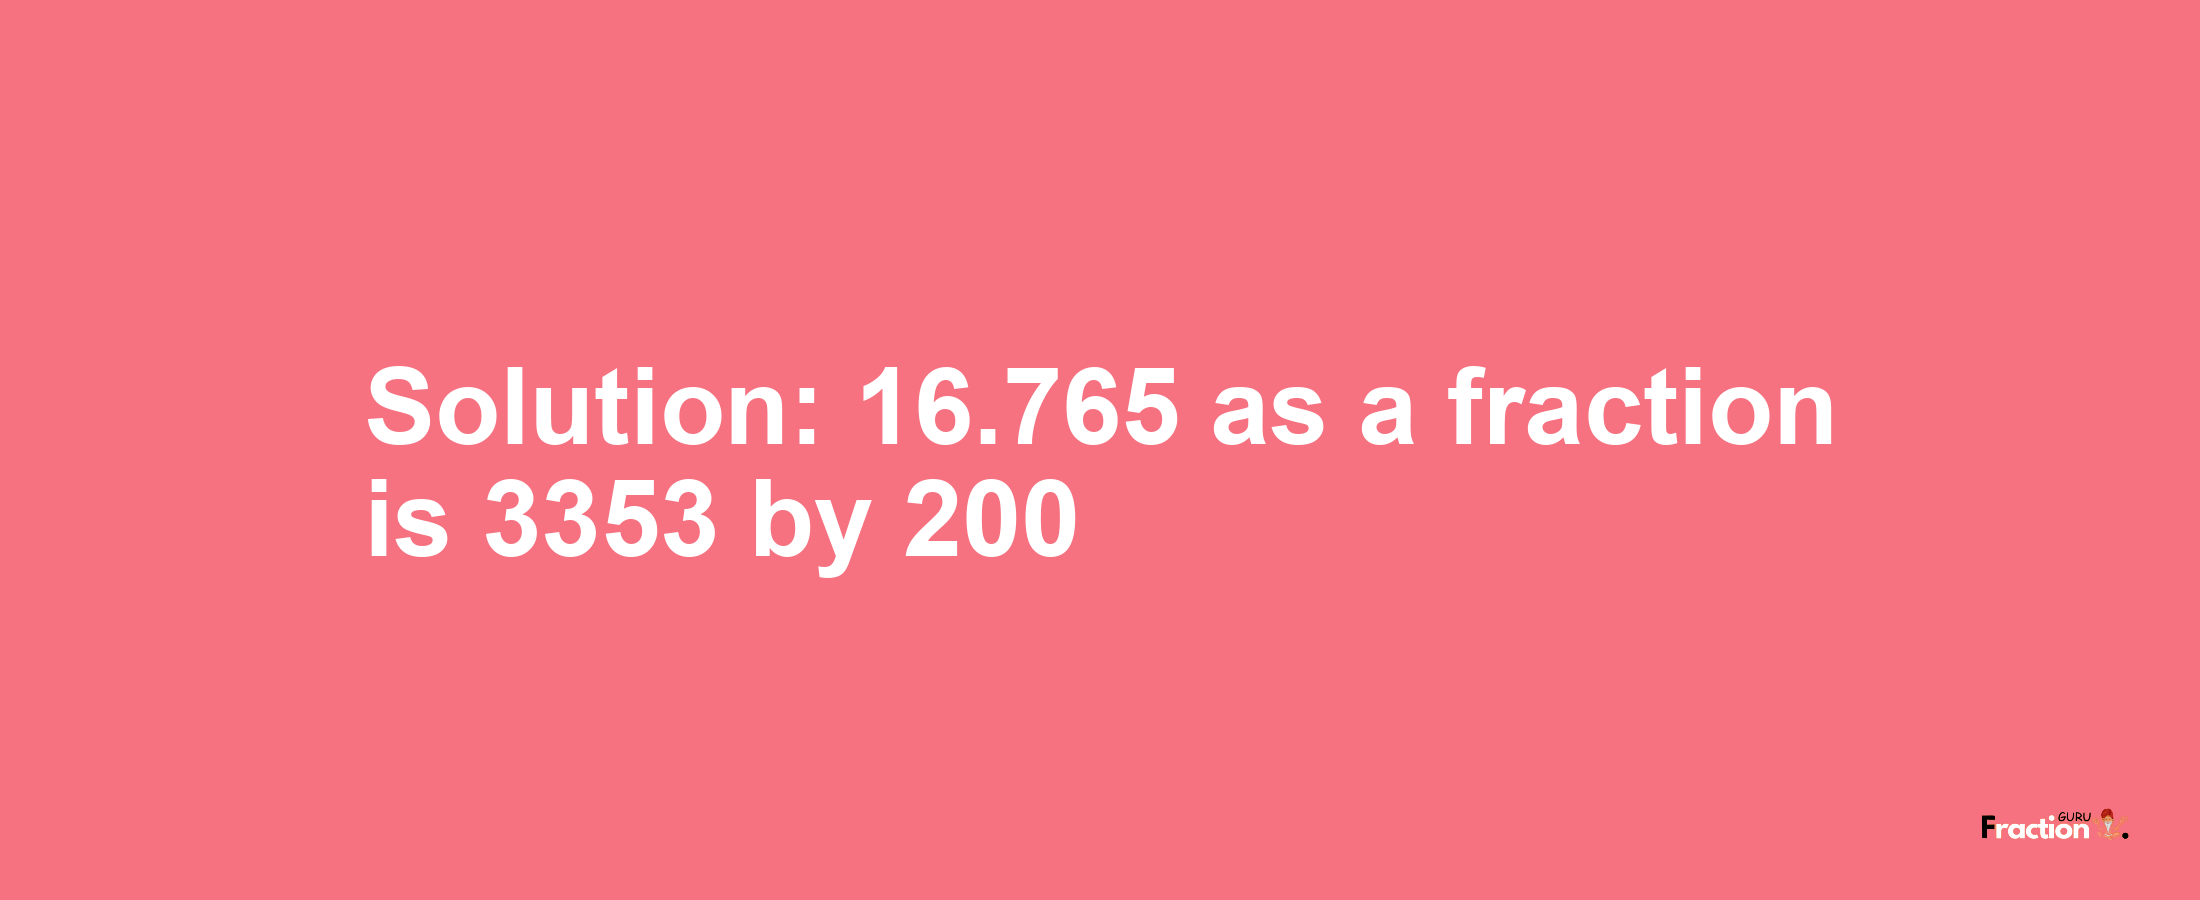 Solution:16.765 as a fraction is 3353/200